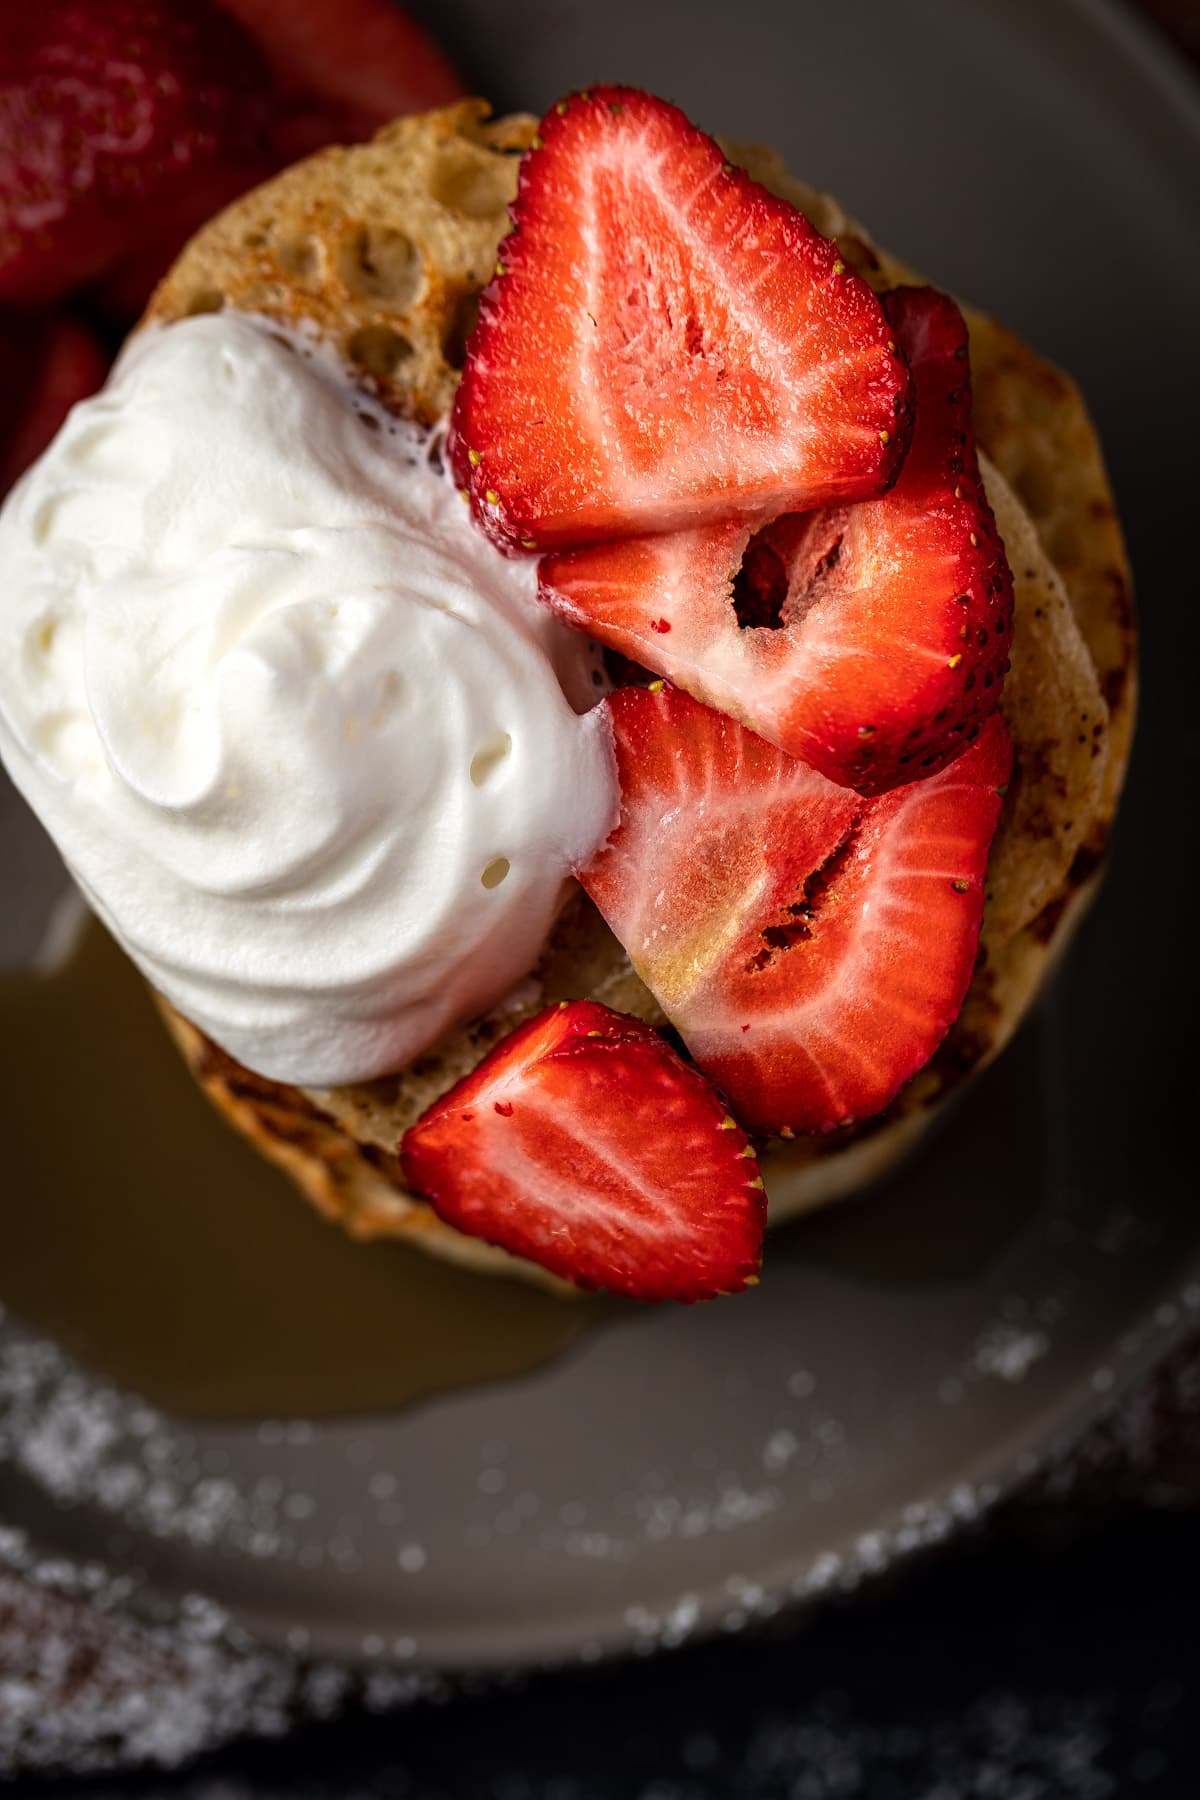 Overhead view of english muffins topped with whipped cream and strawberry slices.